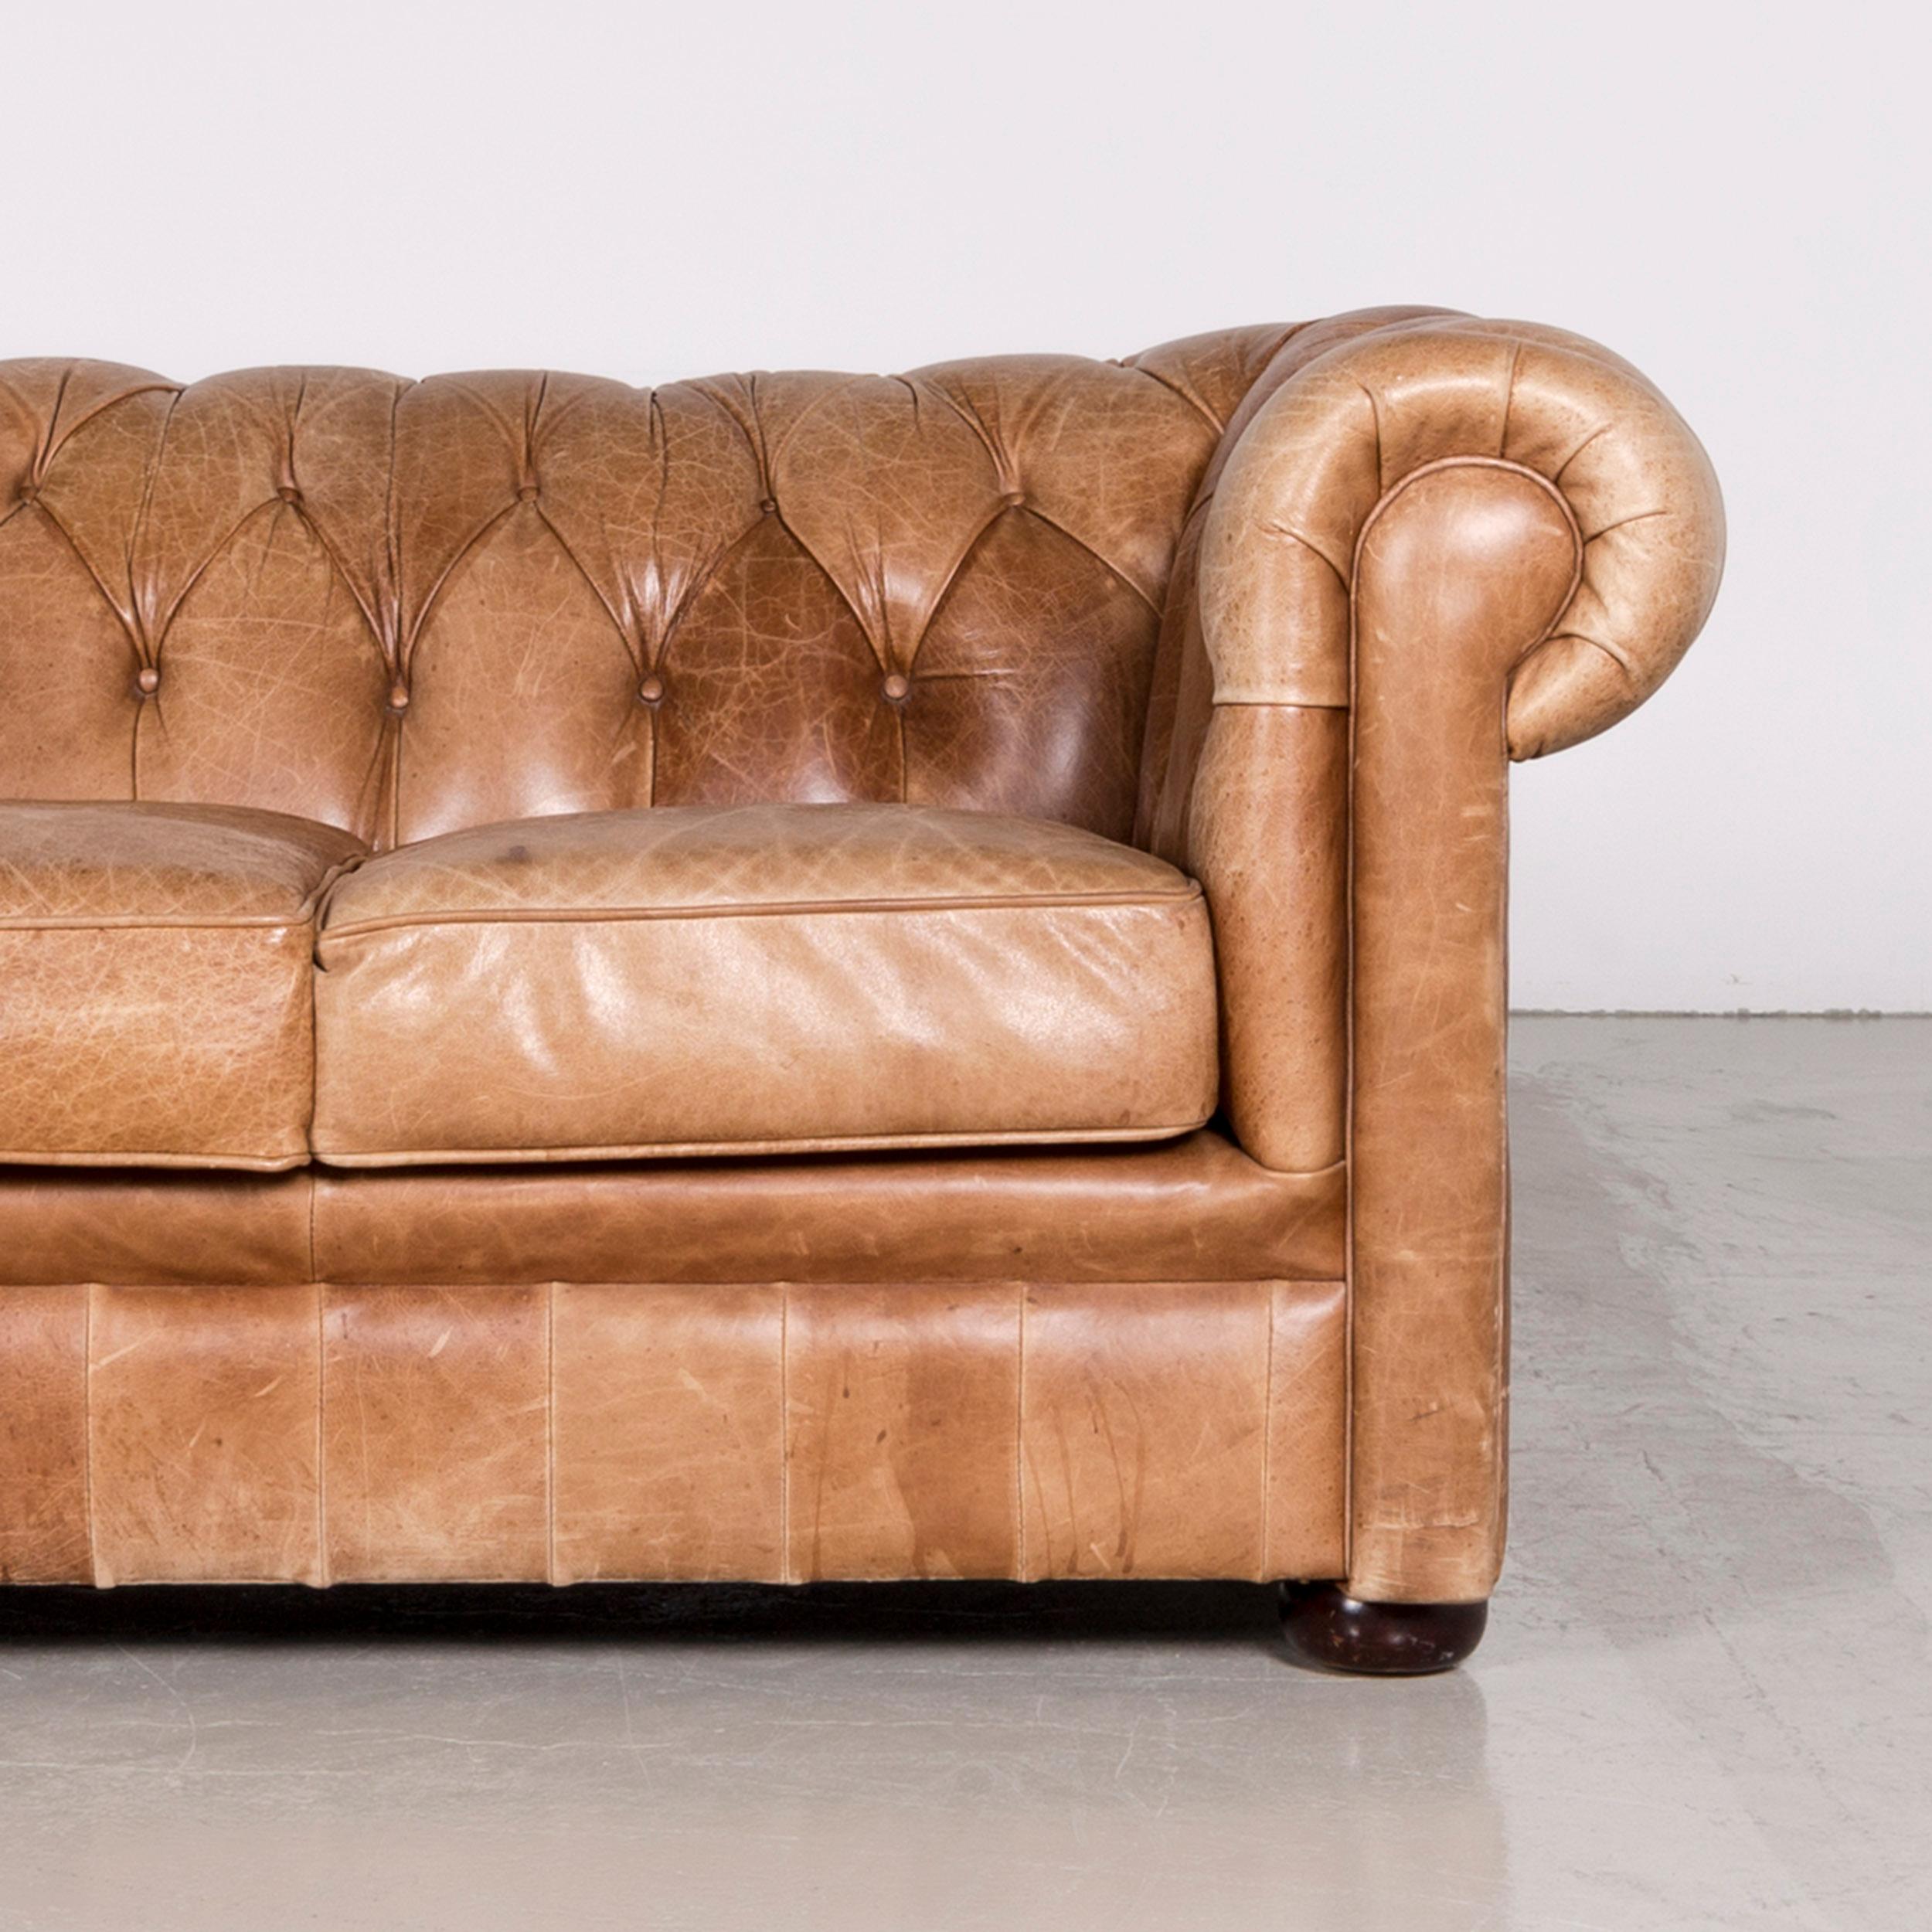 Contemporary Chesterfield Leather Sofa Brown Red Vintage Two-Seat Couch For Sale